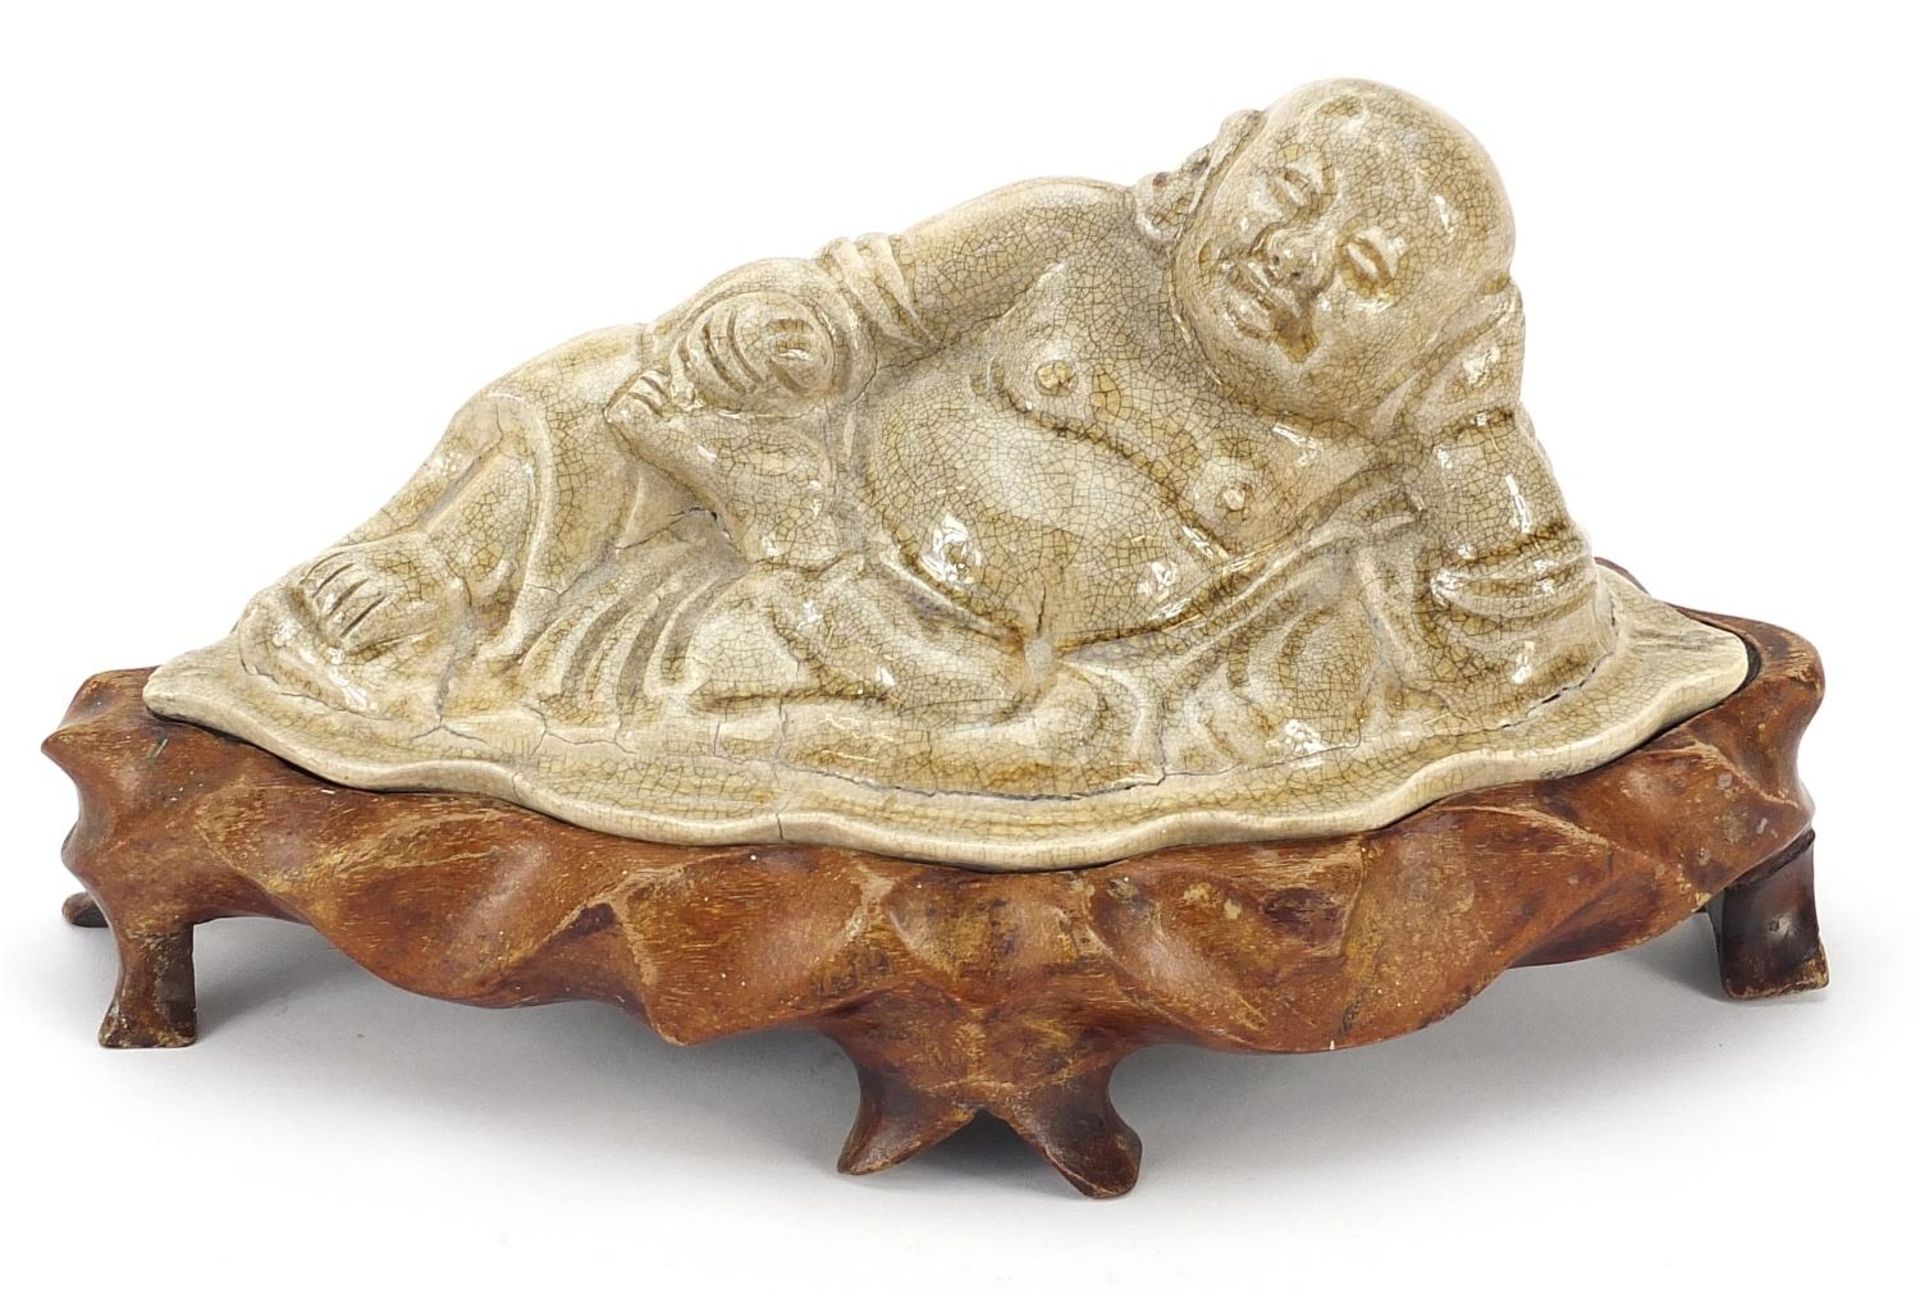 Chinese pottery figure of Buddha on a lotus flower having a grey crackle glaze, raised on a carved